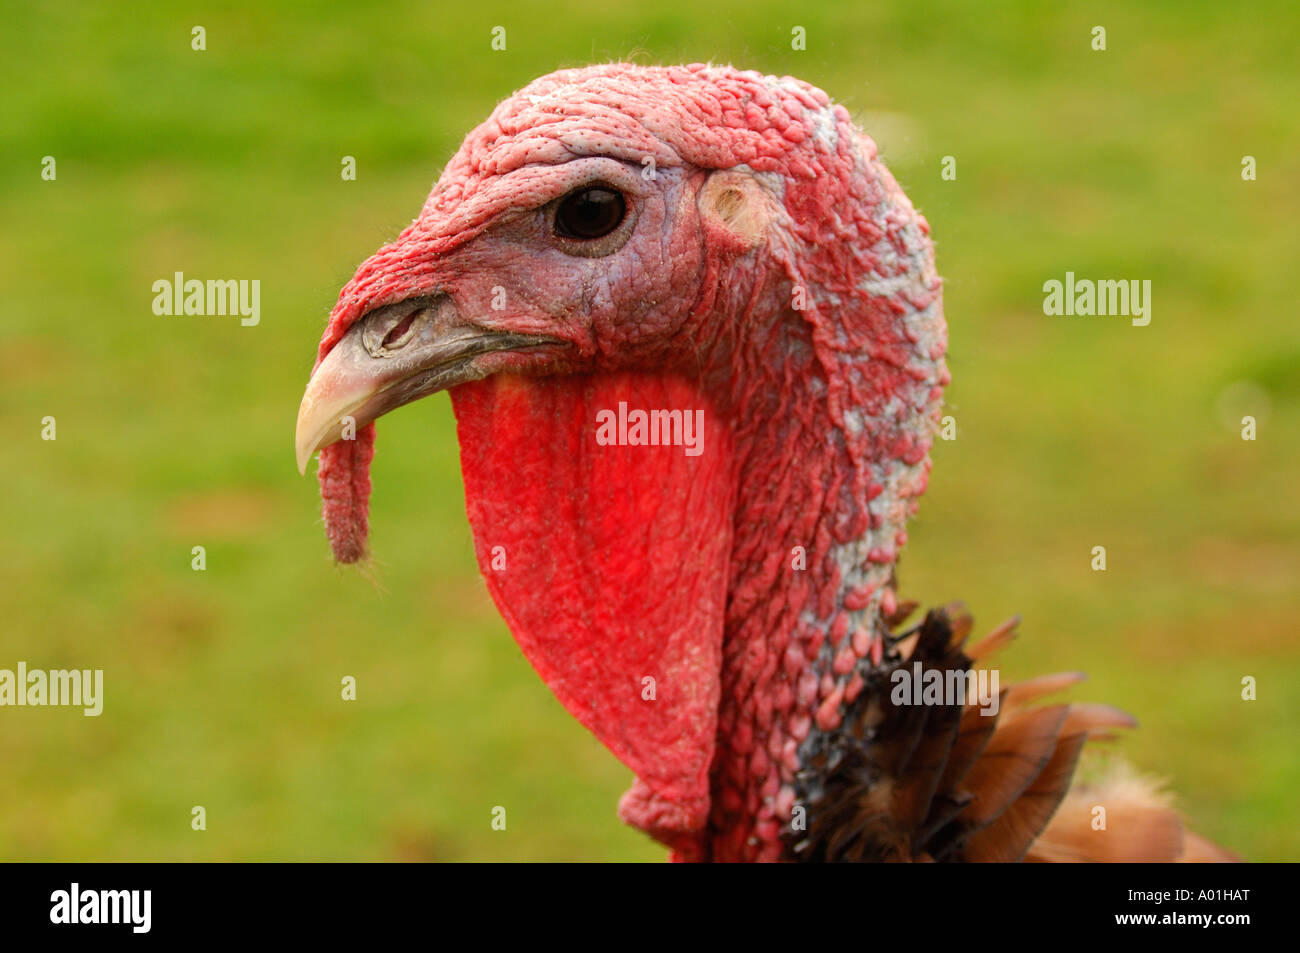 Very sharp and highly detailed close up head and neck portrait of a turkey Stock Photo